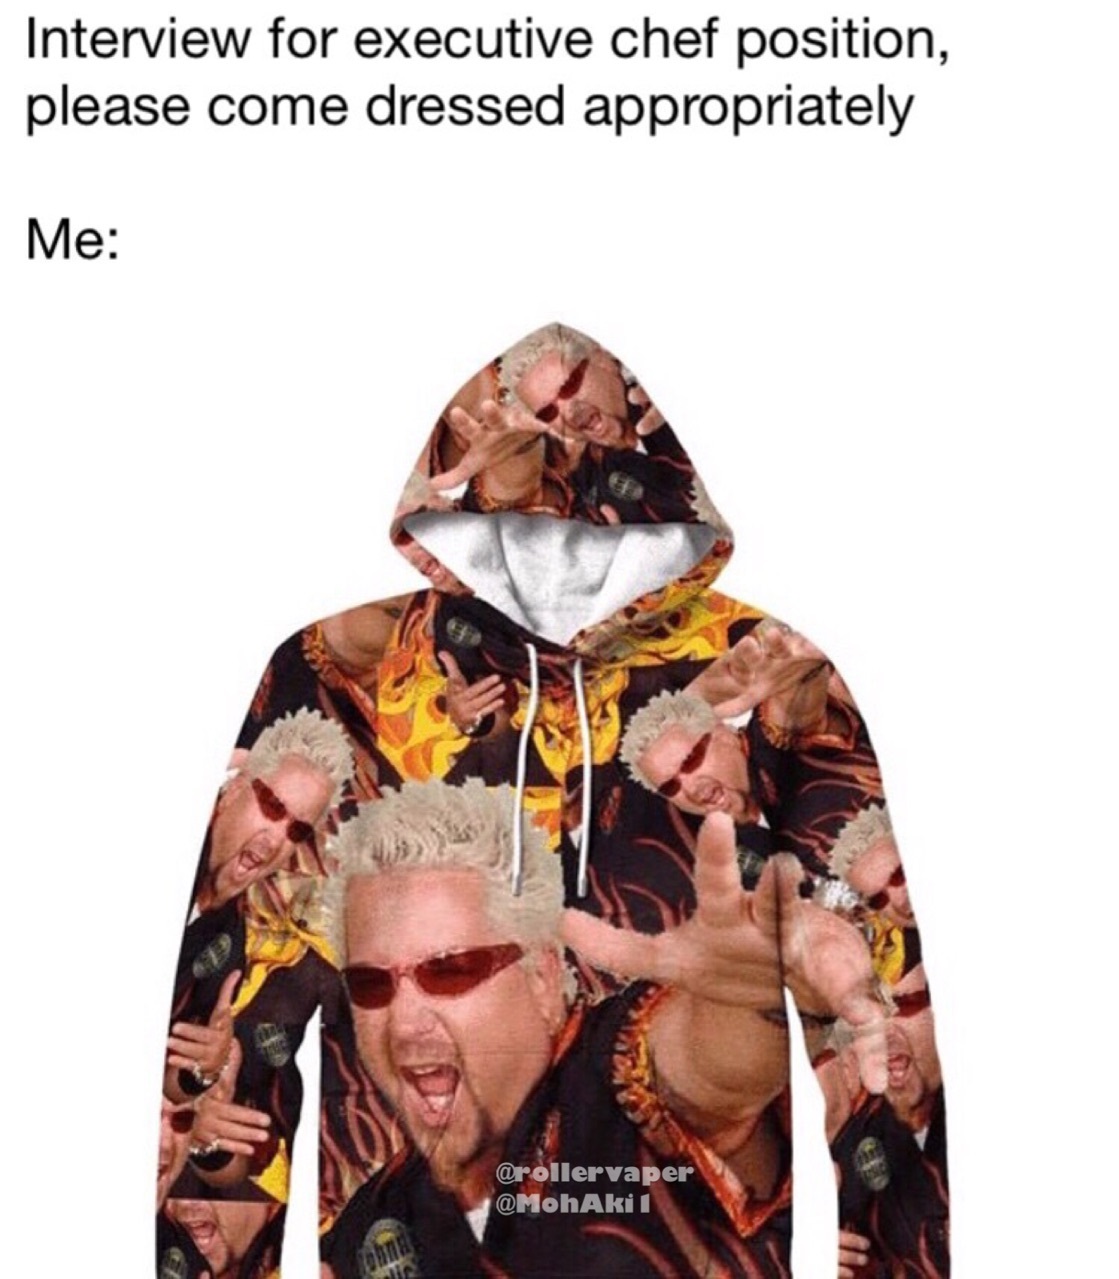 dank meme kids dank meme hoodie - Interview for executive chef position, please come dressed appropriately Me 1